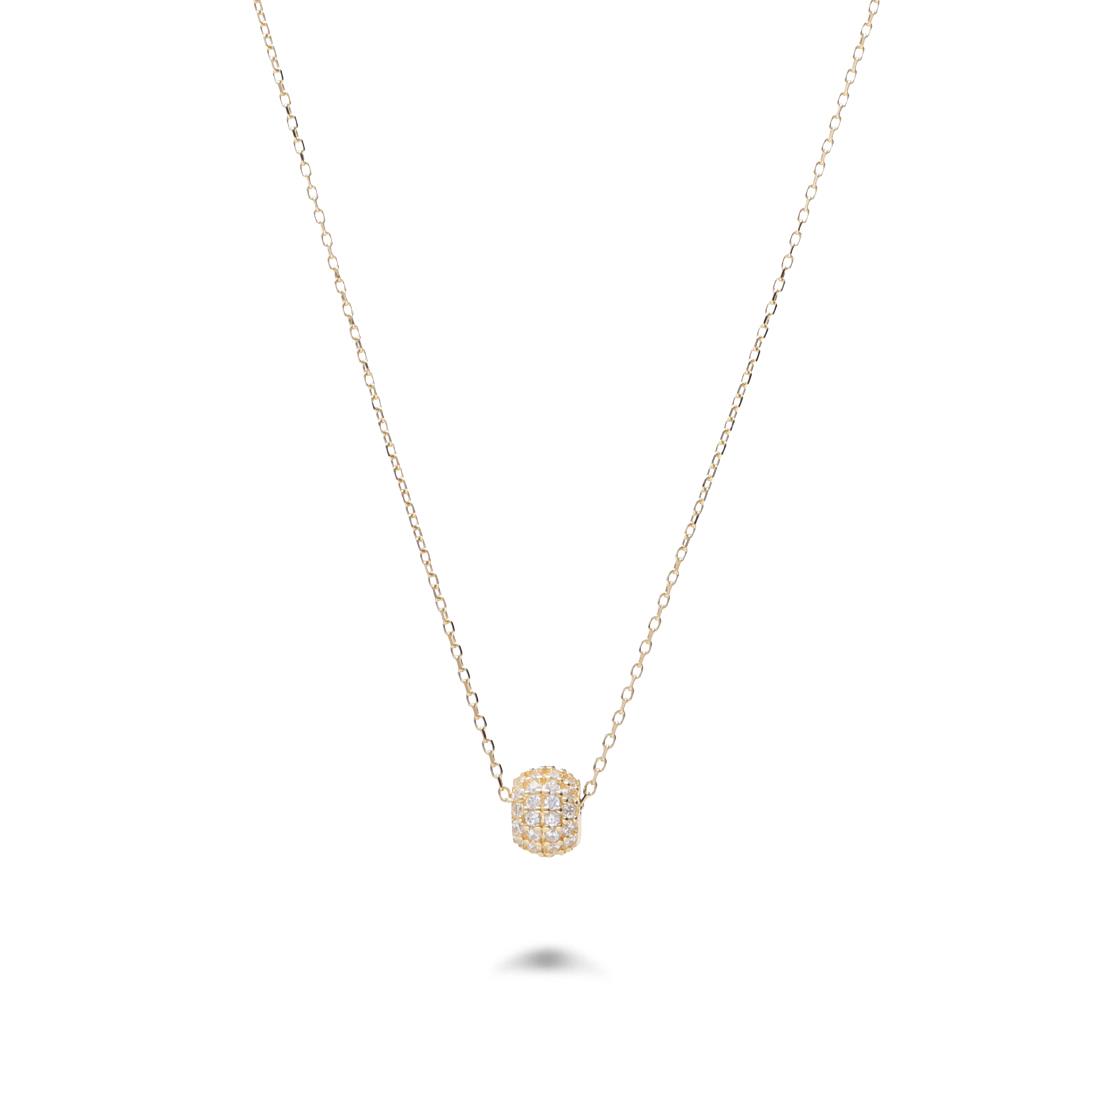 Gold necklace with pendant - ORO&CO